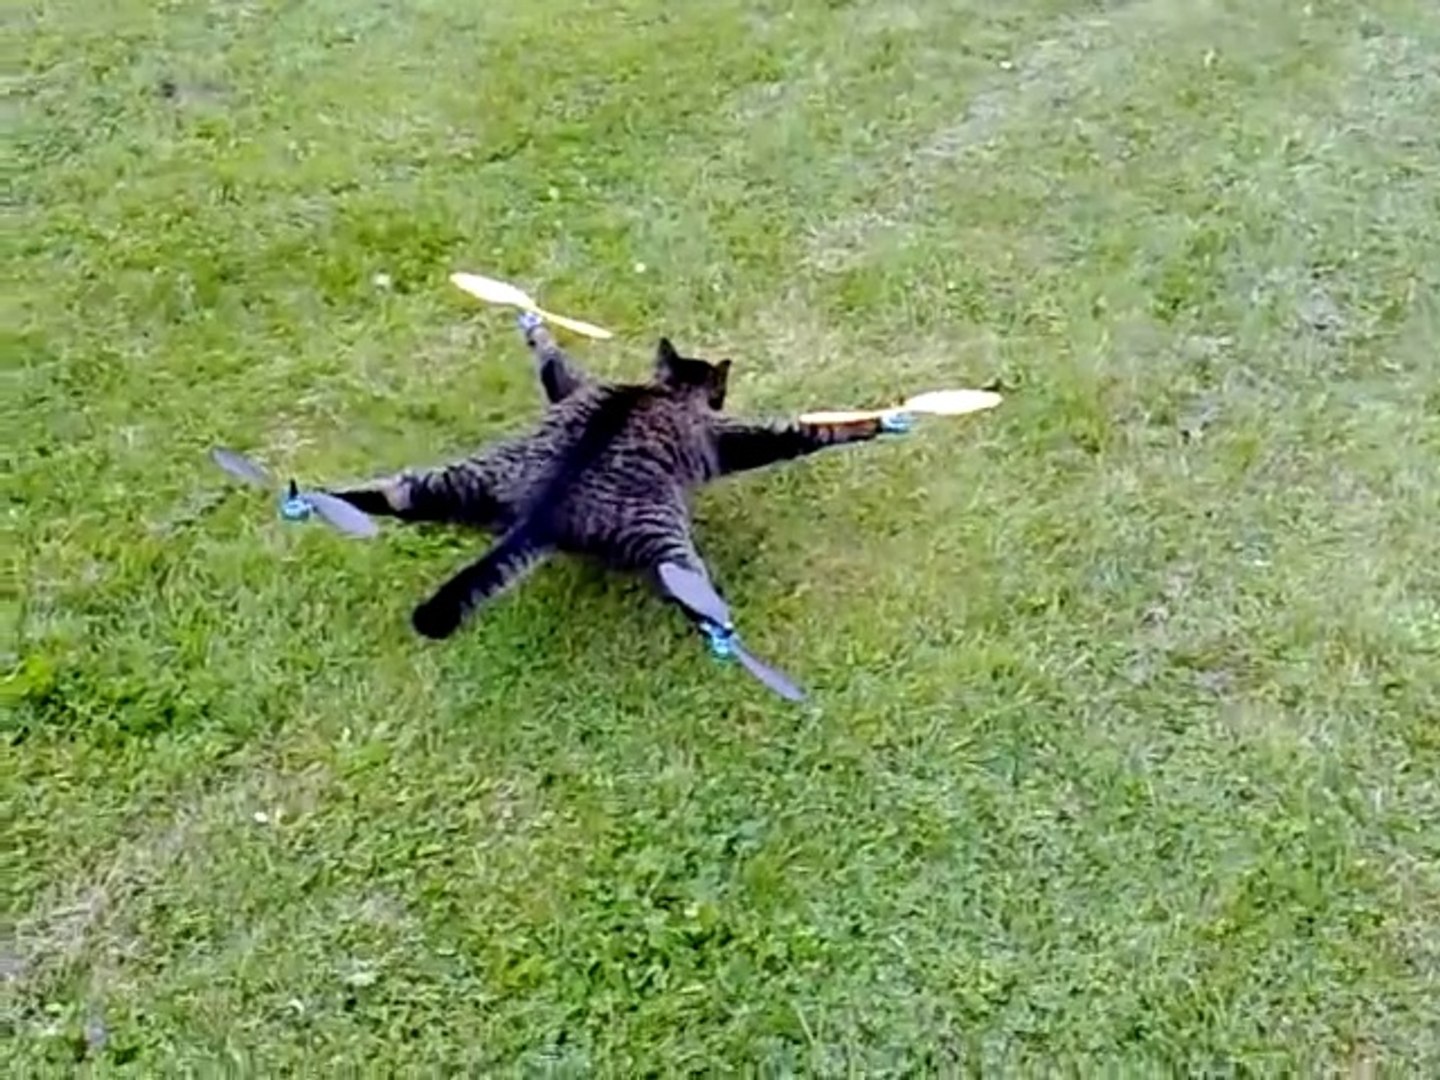 Guy stuffed his cat and made into a drone - Dailymotion